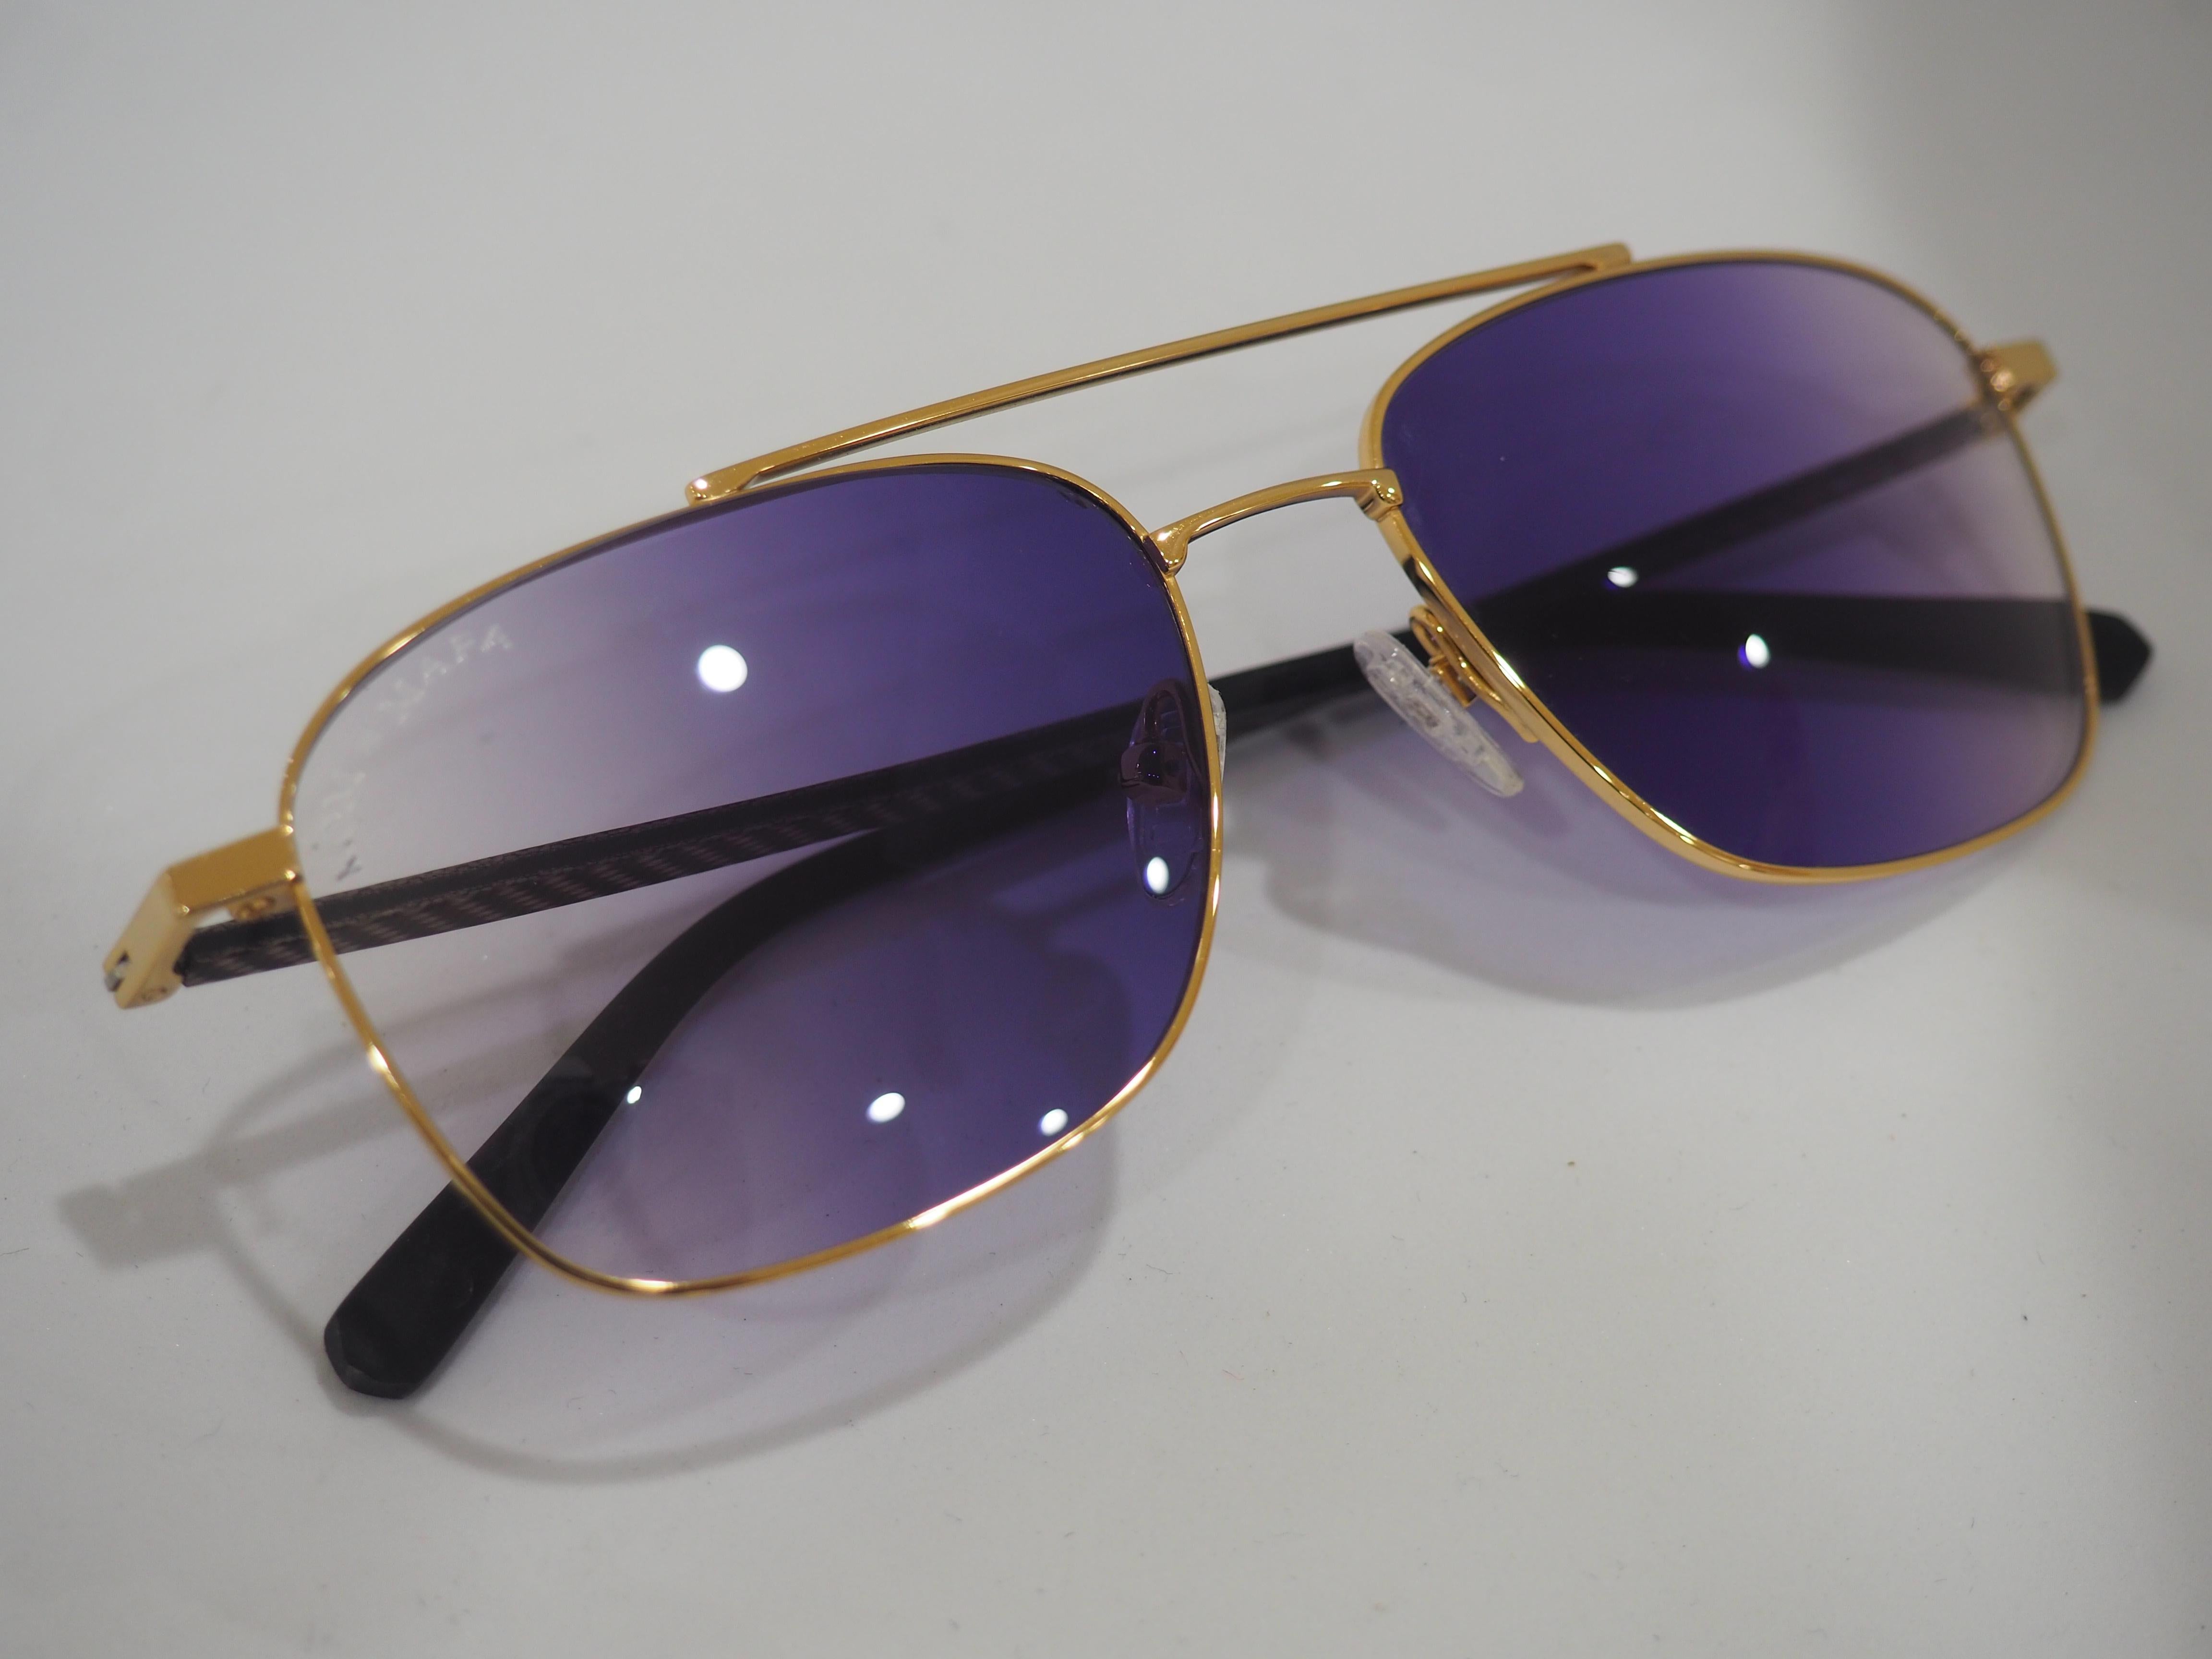 Kommafa purple lens sunglasses
totally made in italy 
one of a kind